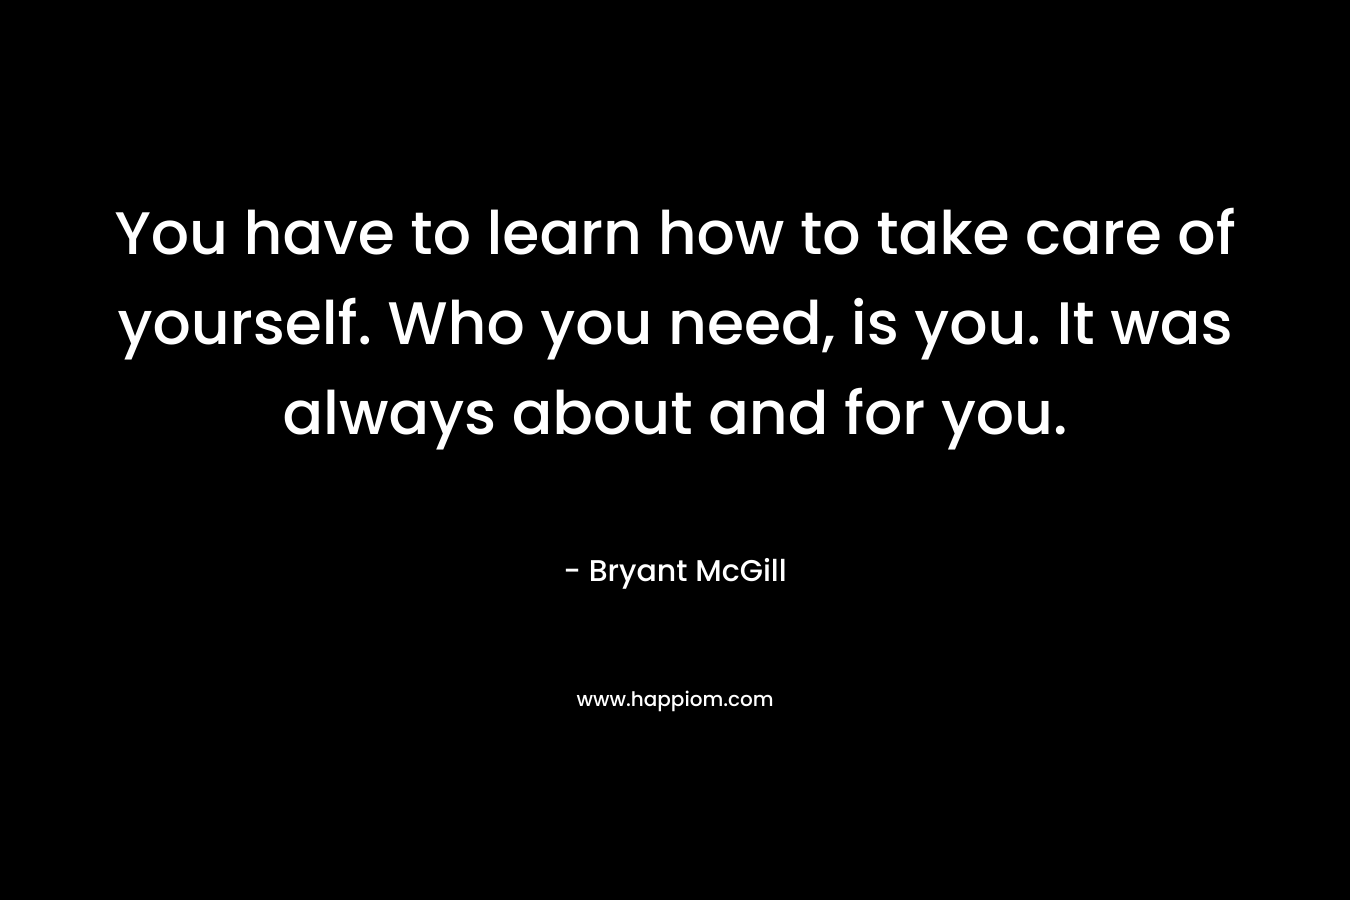 You have to learn how to take care of yourself. Who you need, is you. It was always about and for you.